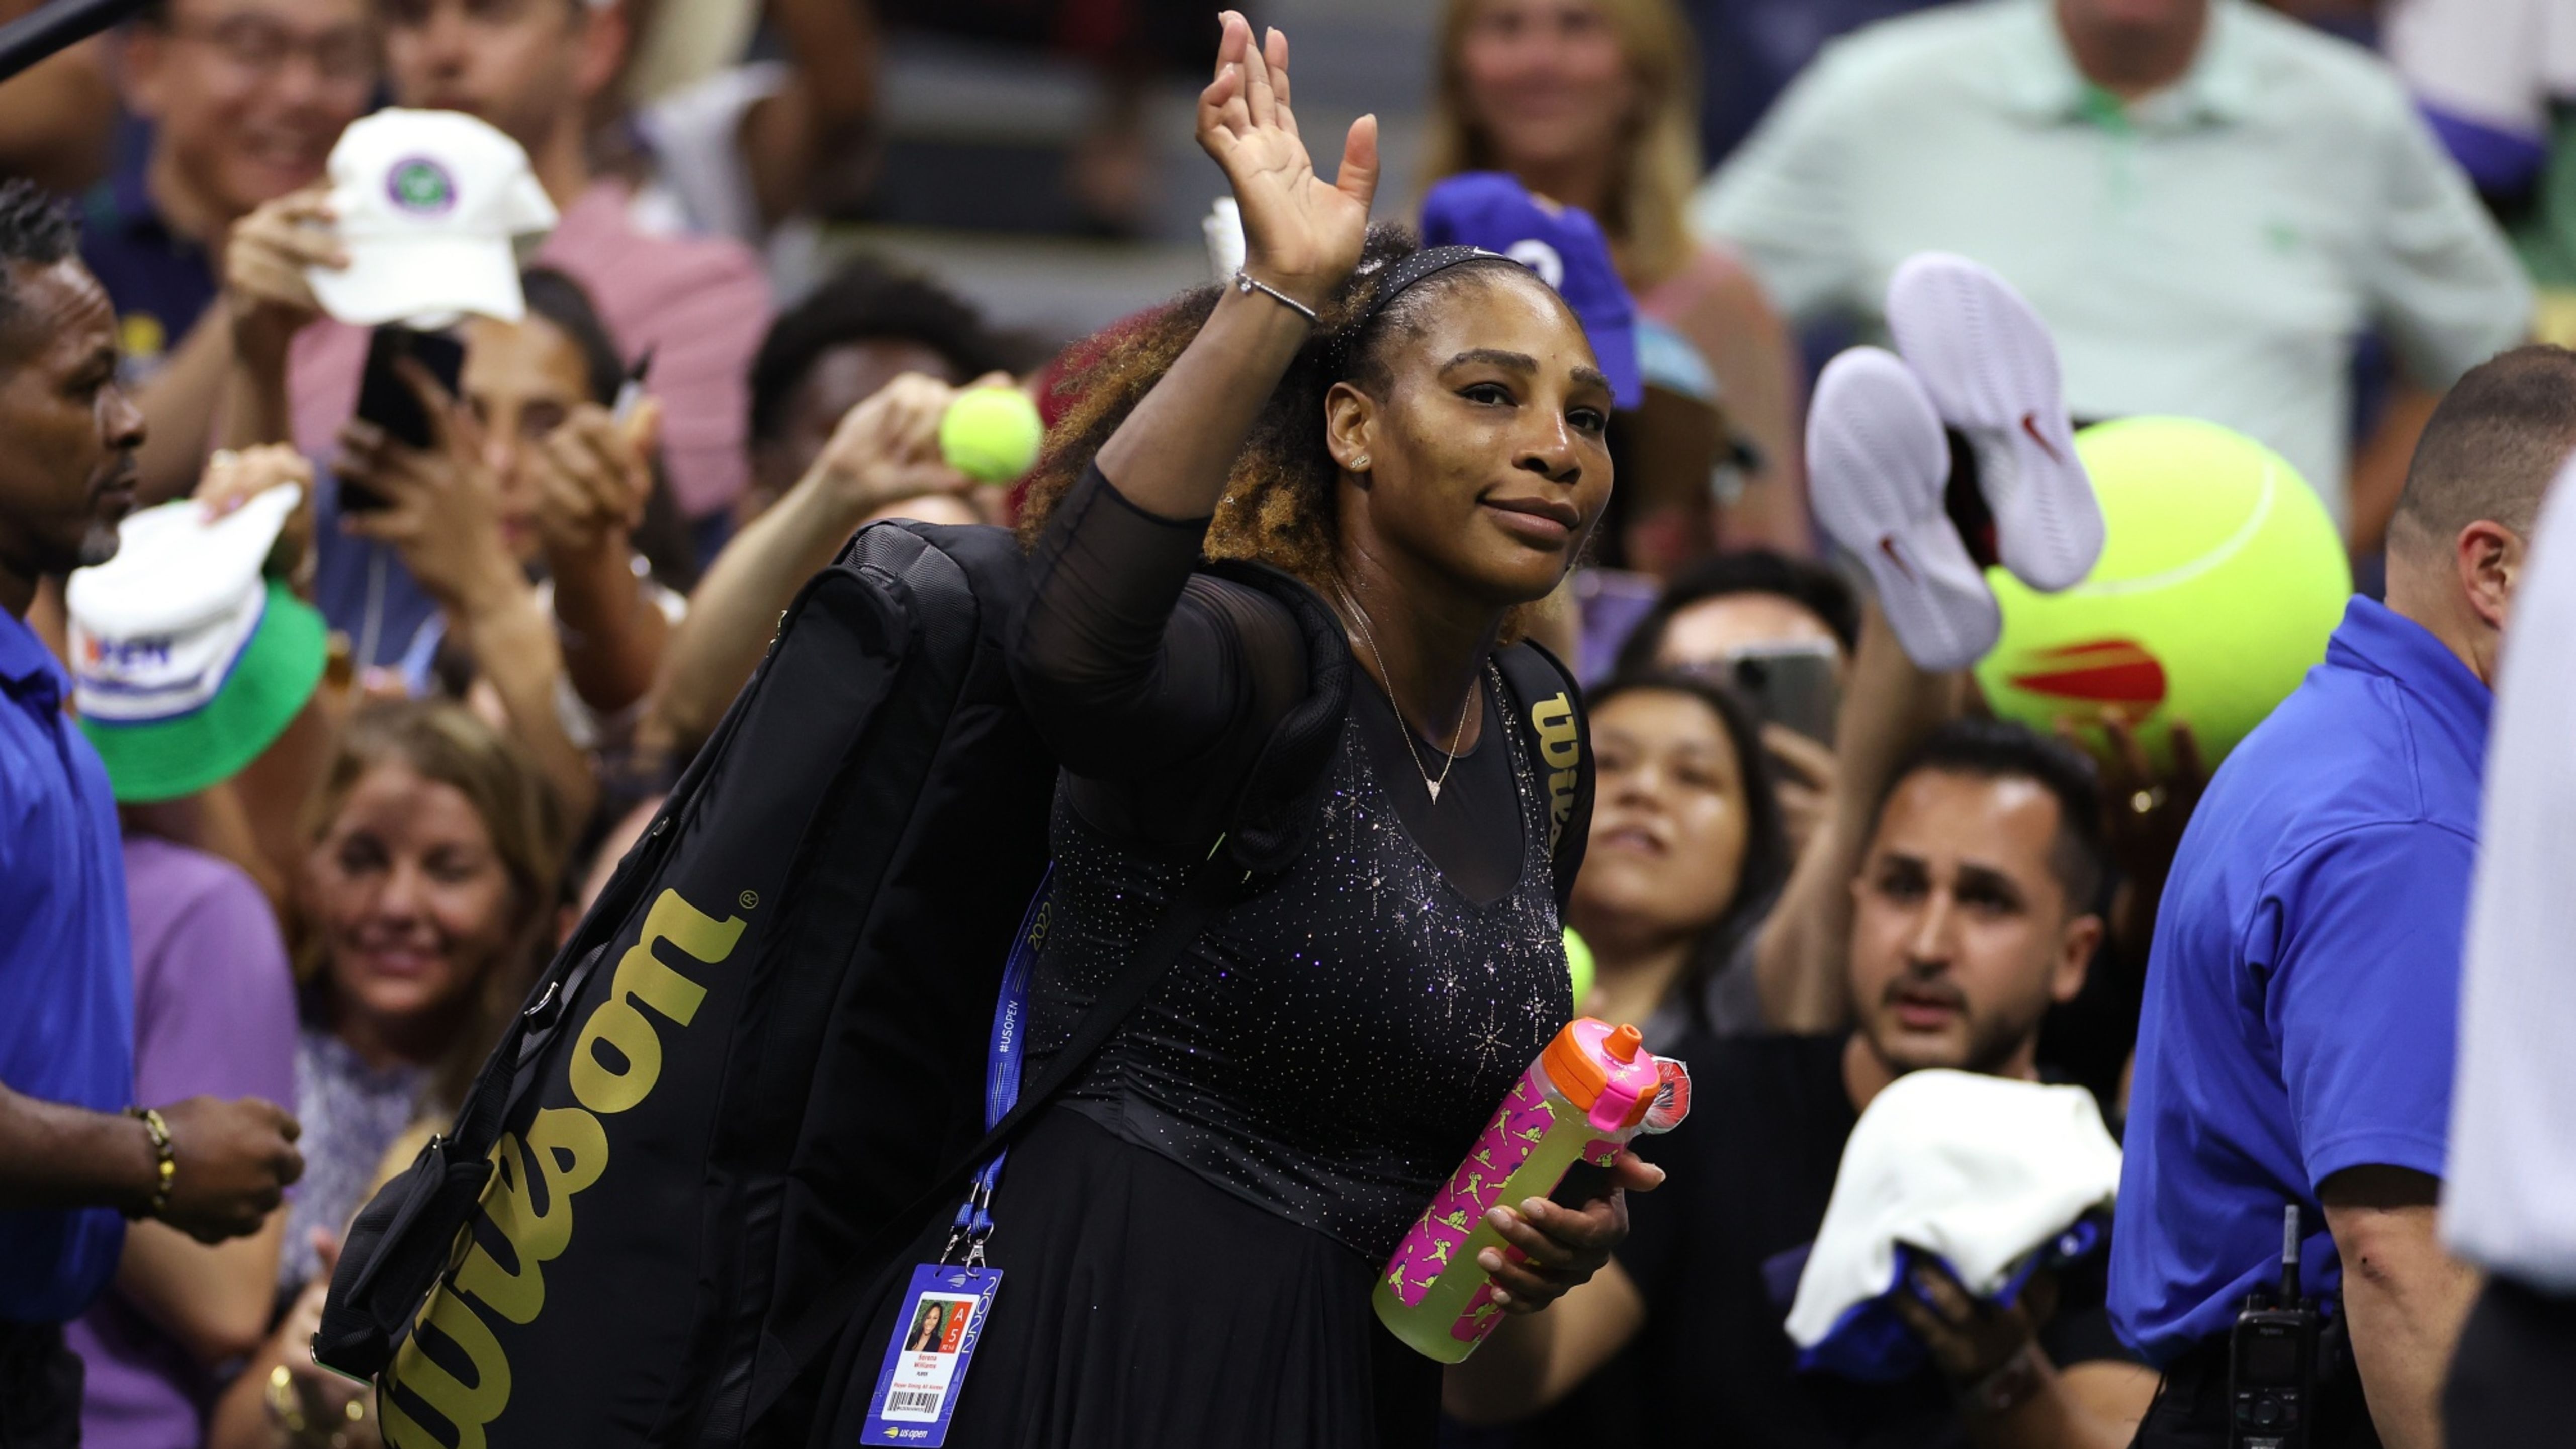 According to Twitter, Serena Williams is the most-mentioned female athlete ever